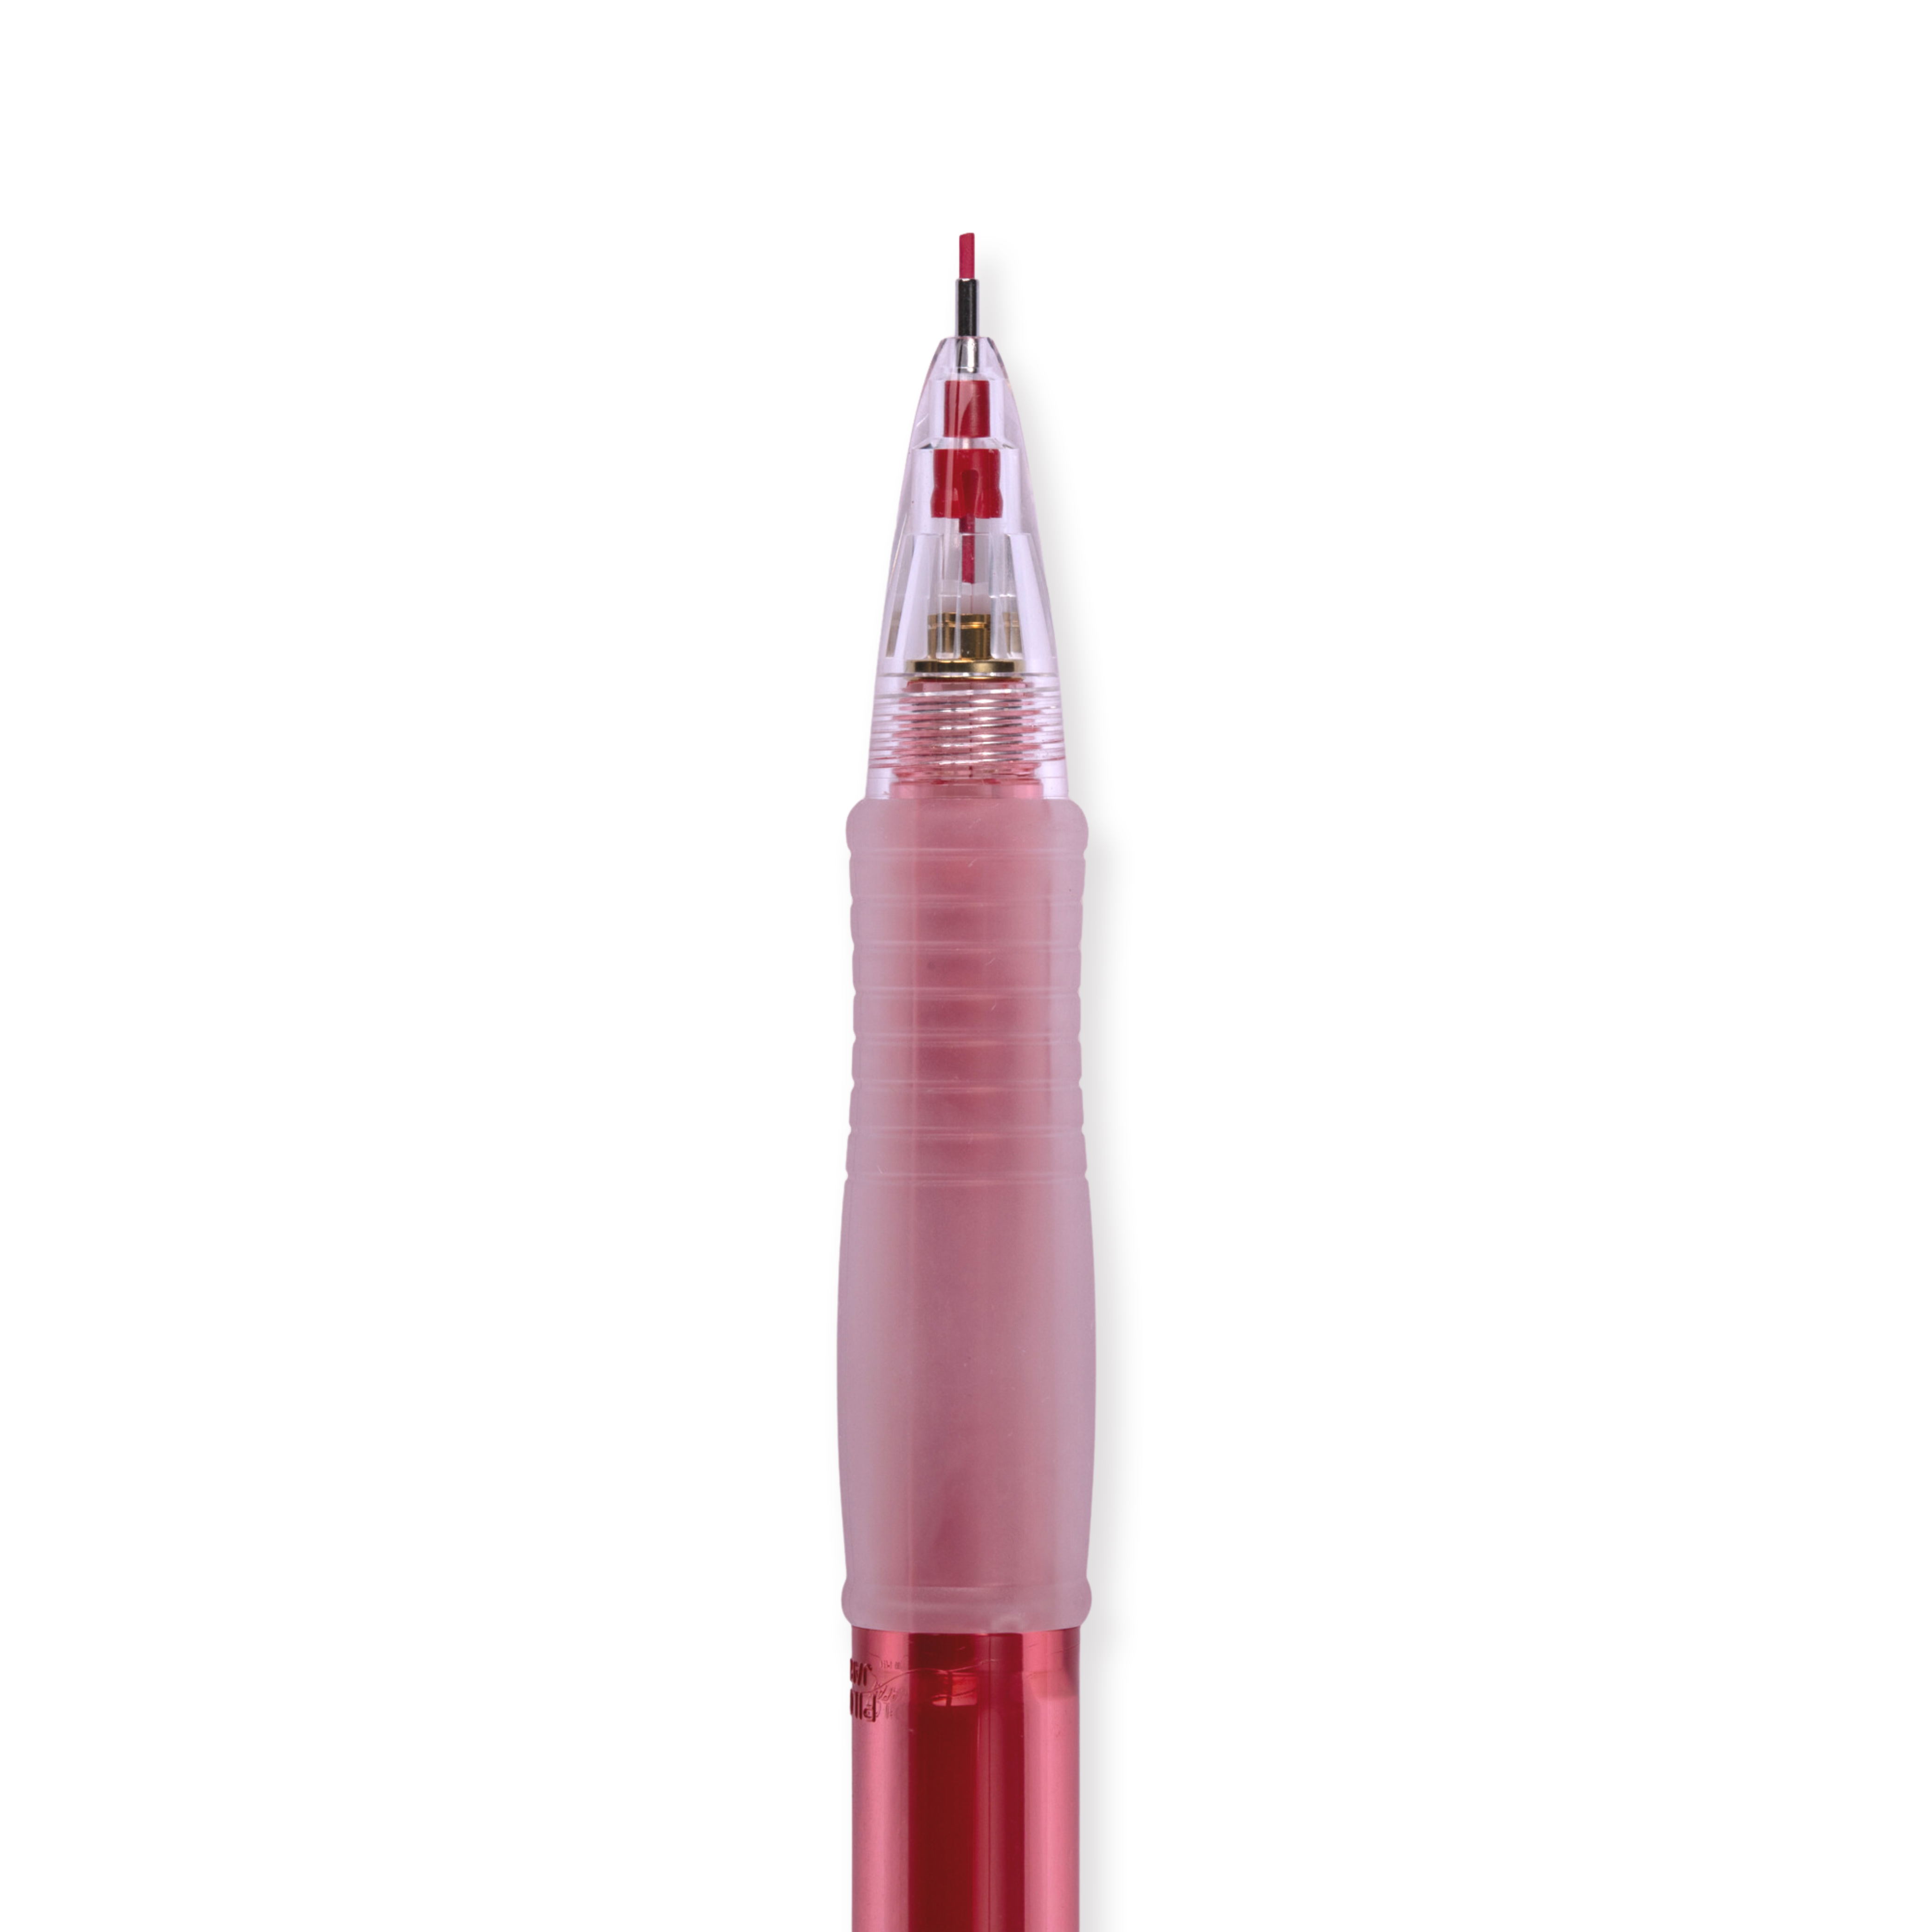 Pilot Color Eno Mechanical Pencil - 0.7 mm - Red Body - Red Lead